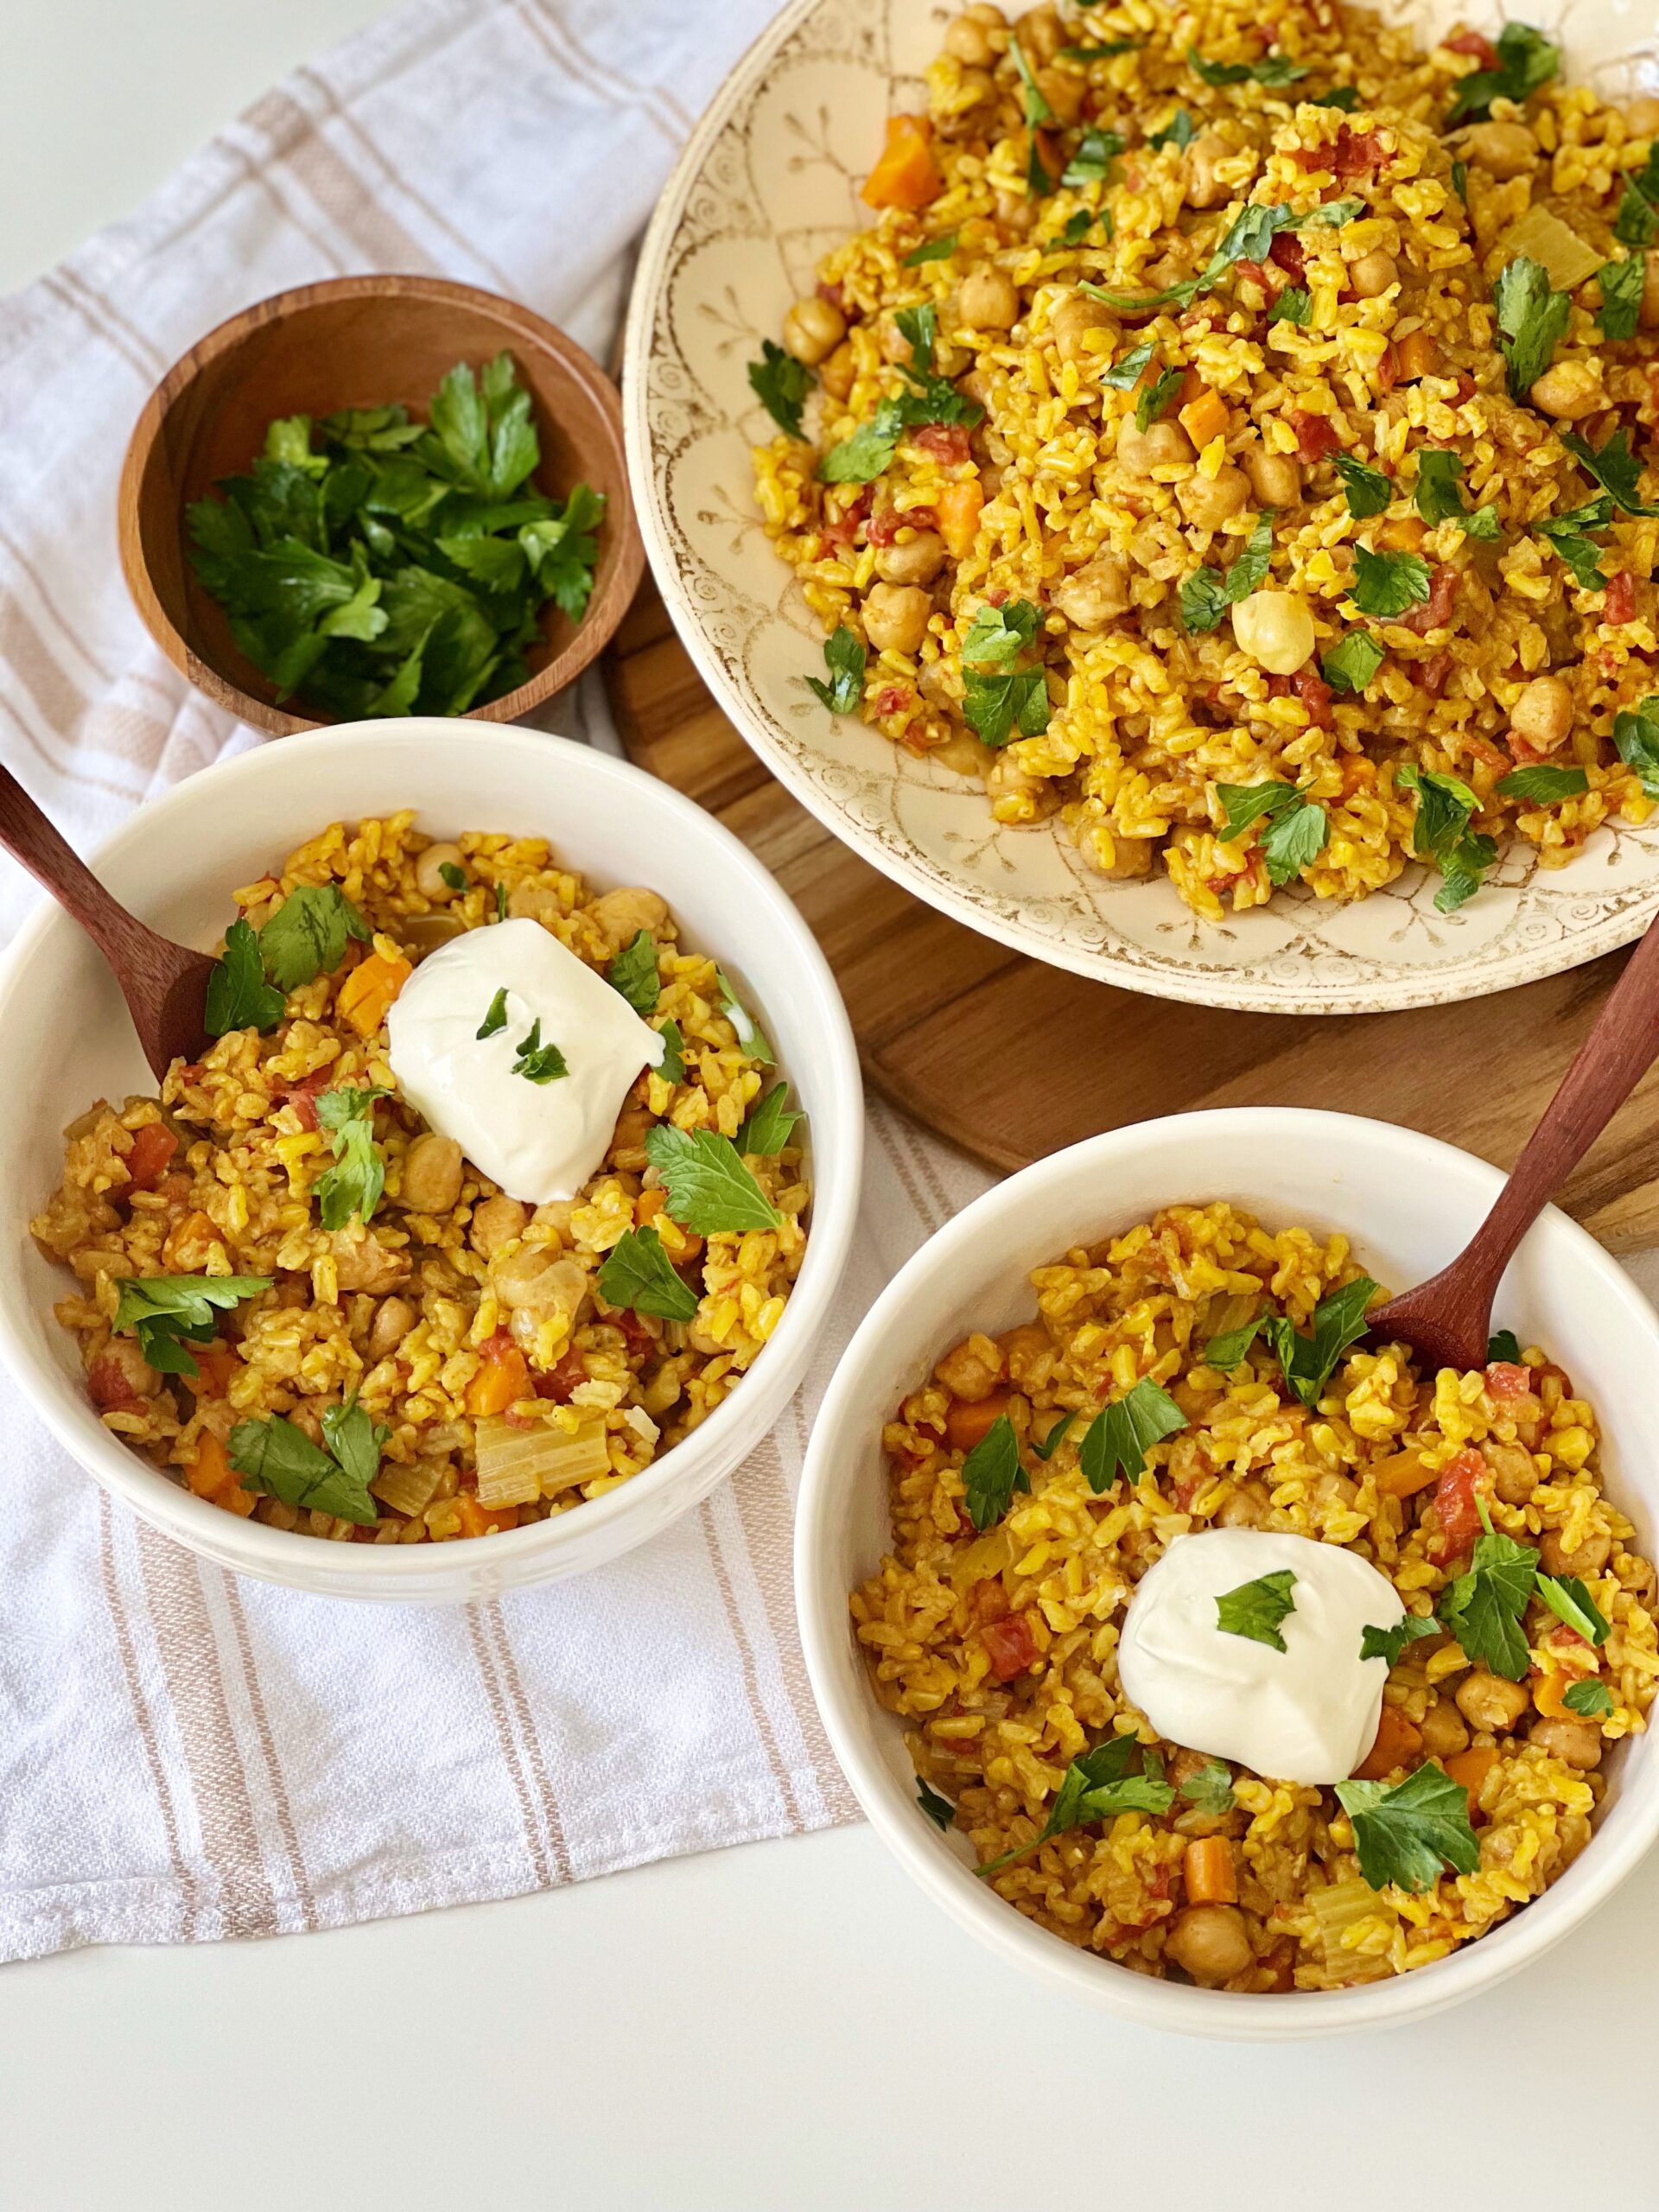 Turmeric Chickpea and Rice Bowls